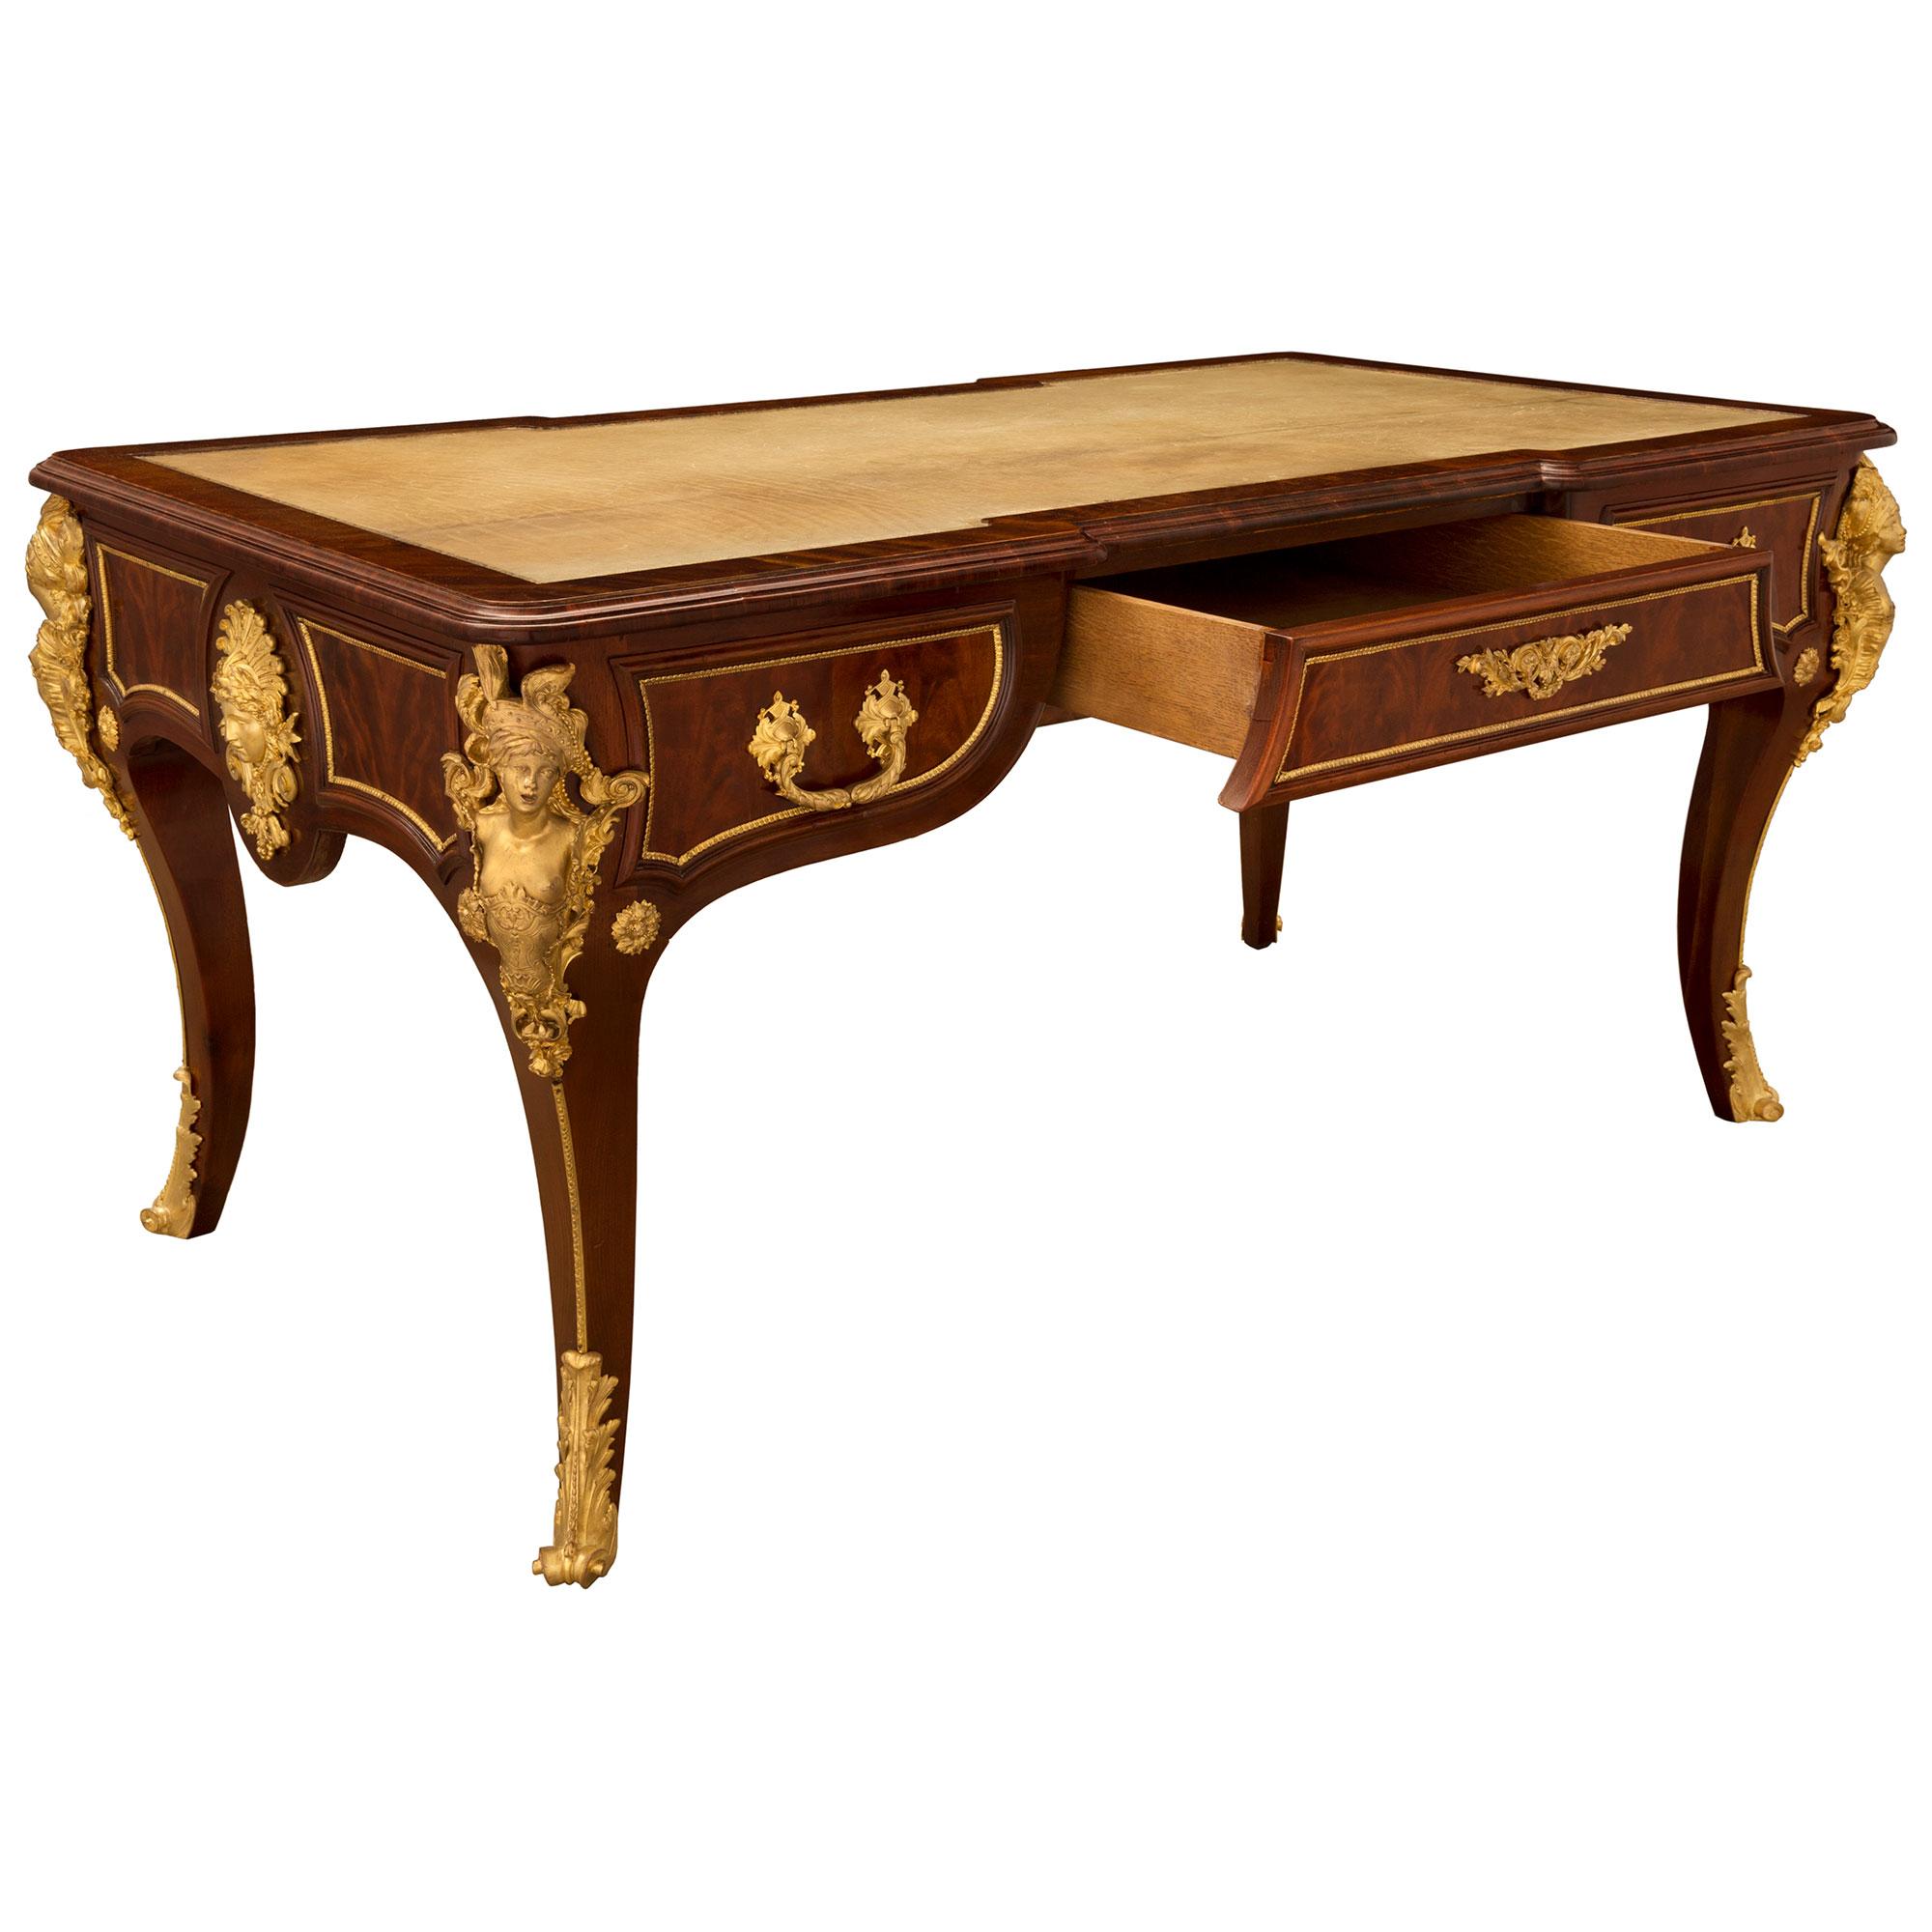 French 19th Century Louis XV Style Flamed Mahogany and Ormolu Bureau Plat Desk In Good Condition For Sale In West Palm Beach, FL